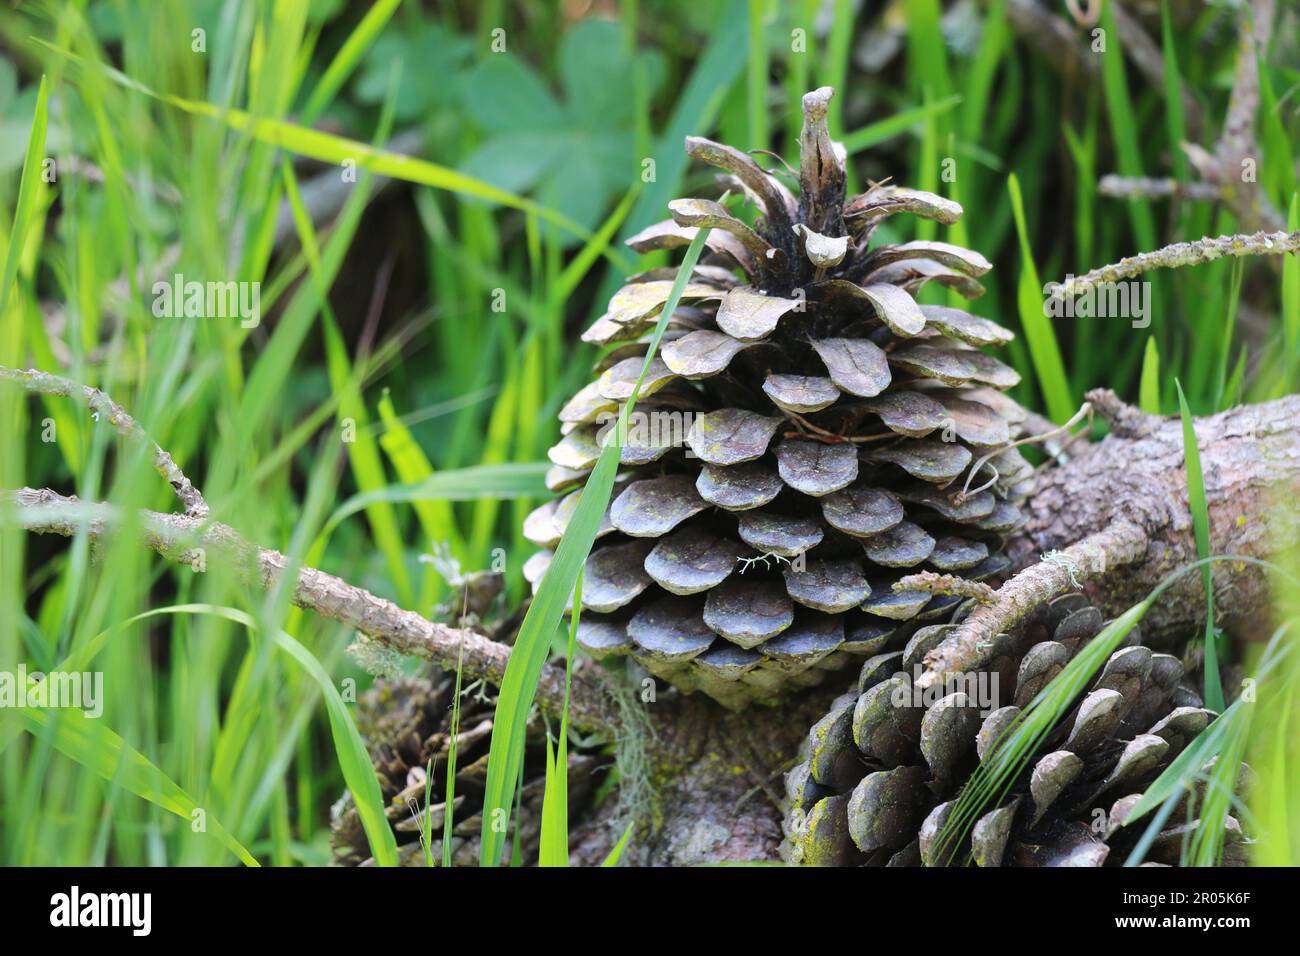 Pine cone on the forest floor, framed by tall green grass. Stock Photo